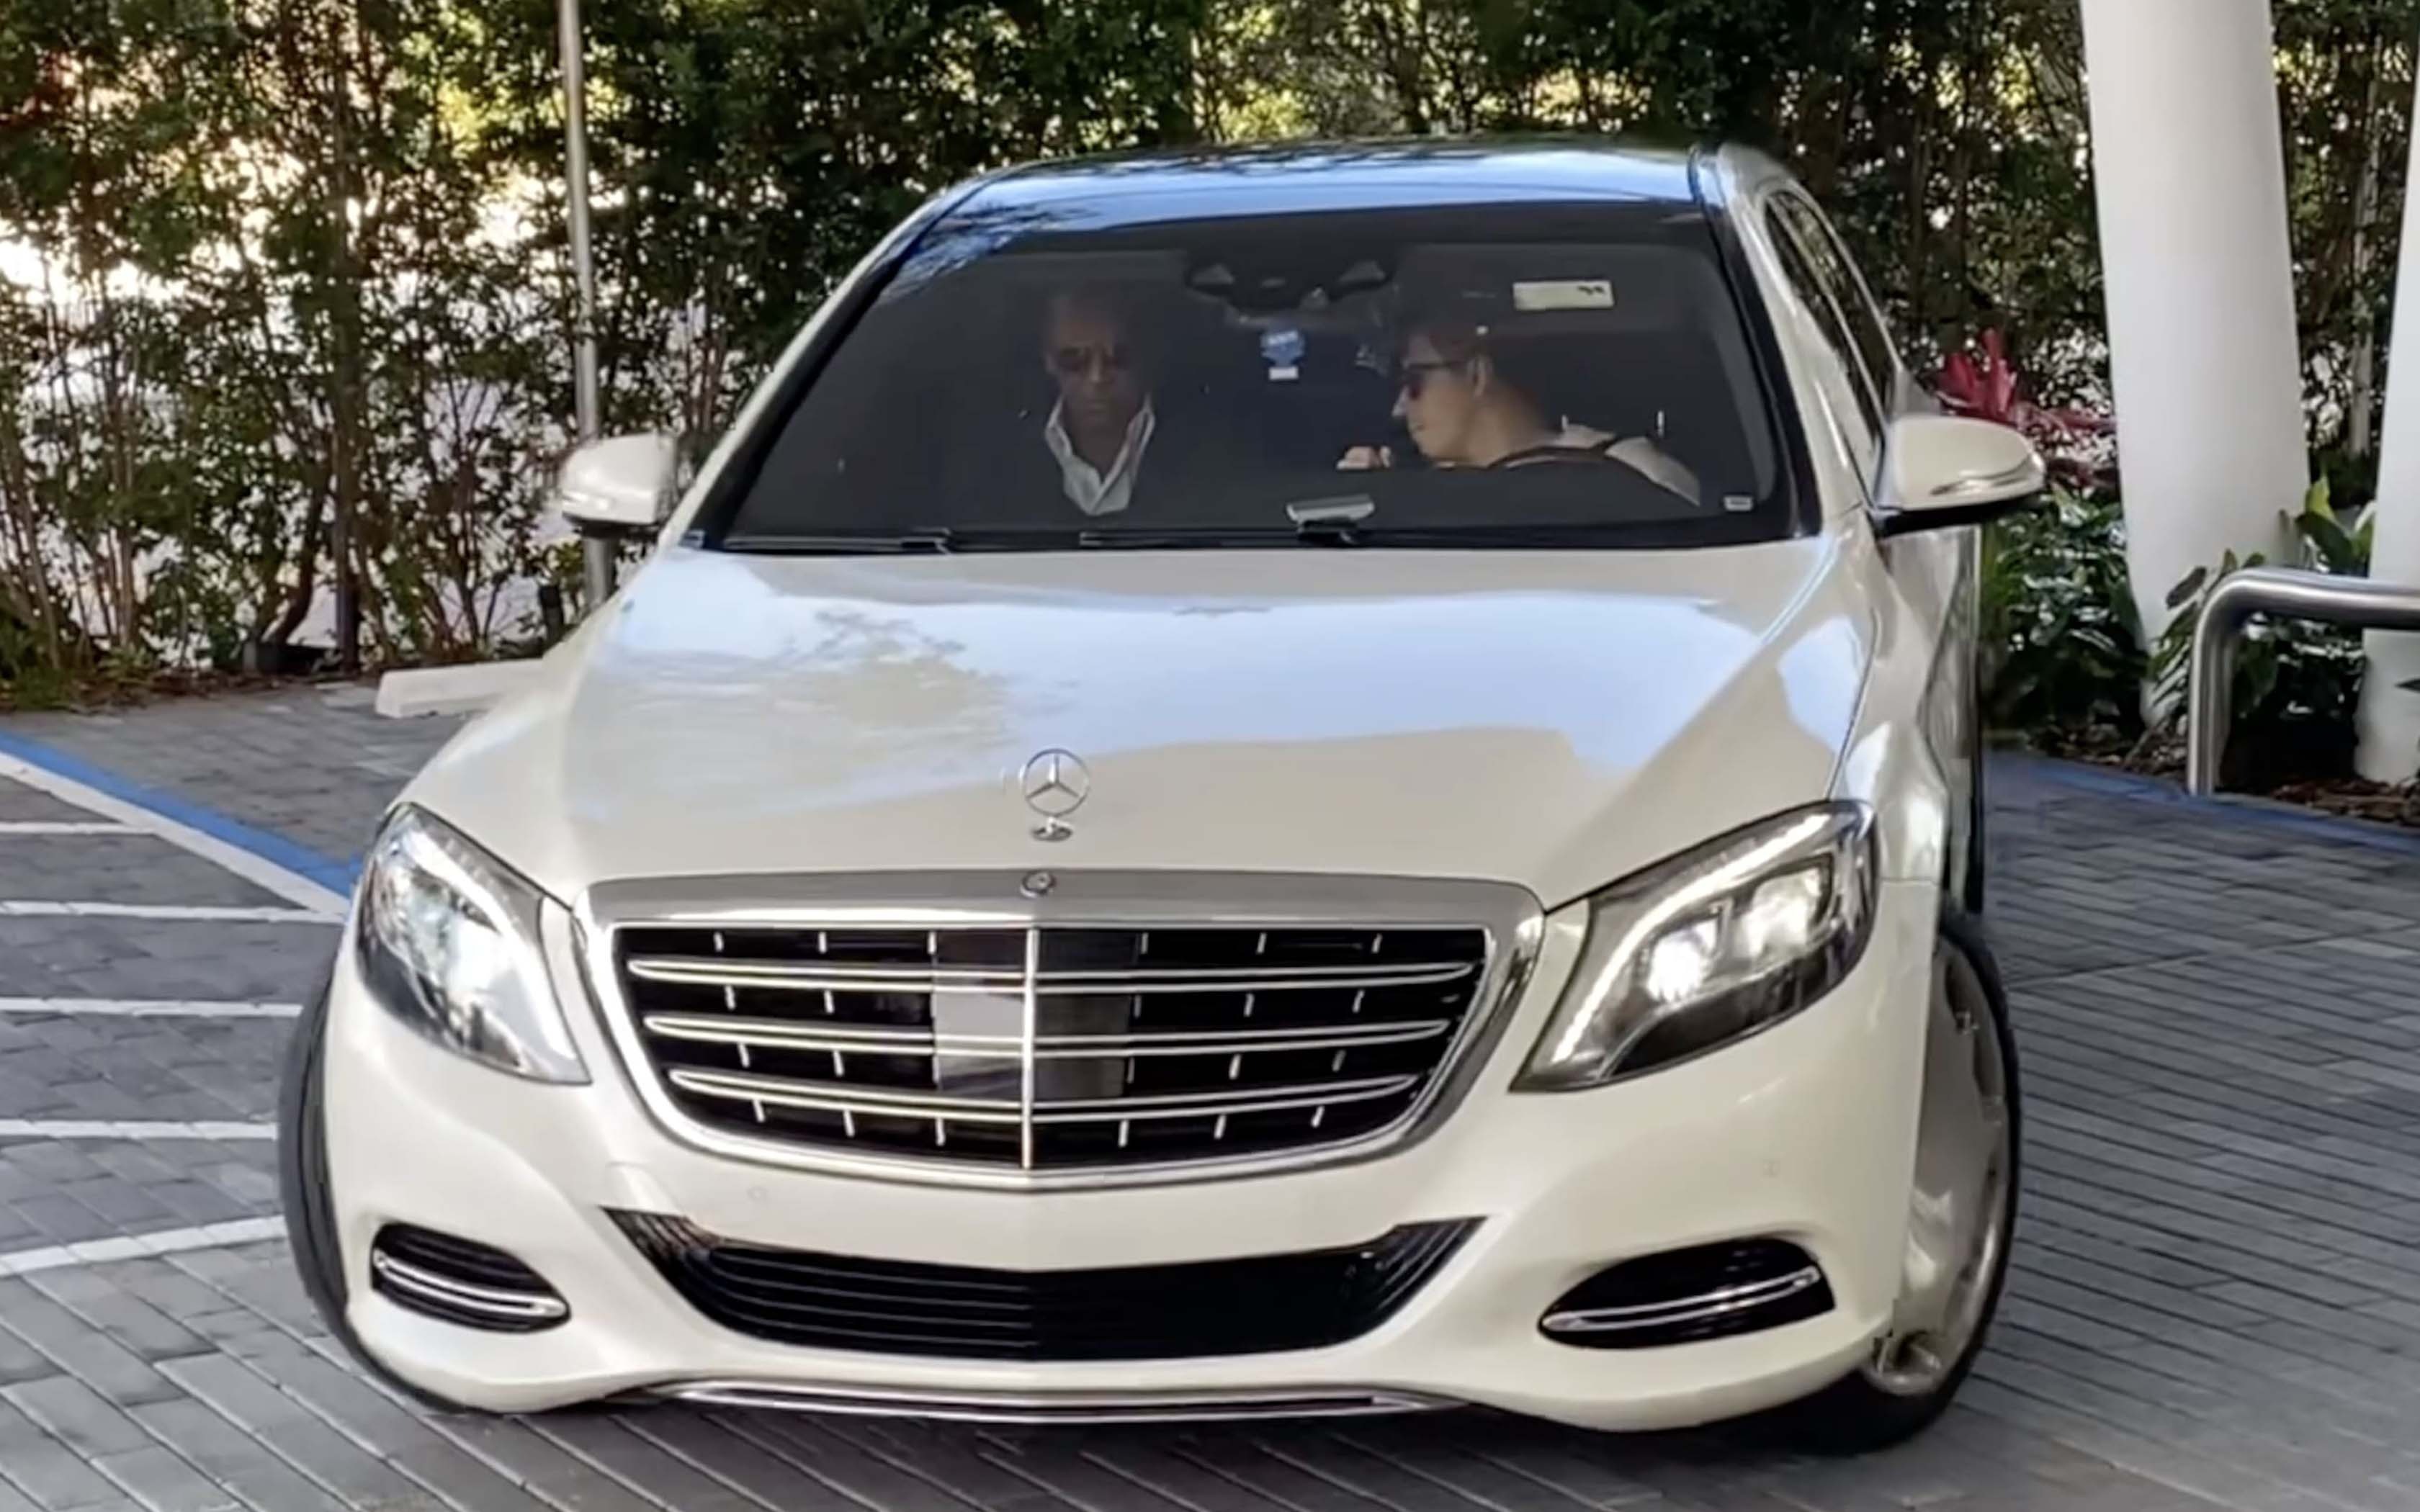 Alex Rodriguez and his assistant in a car